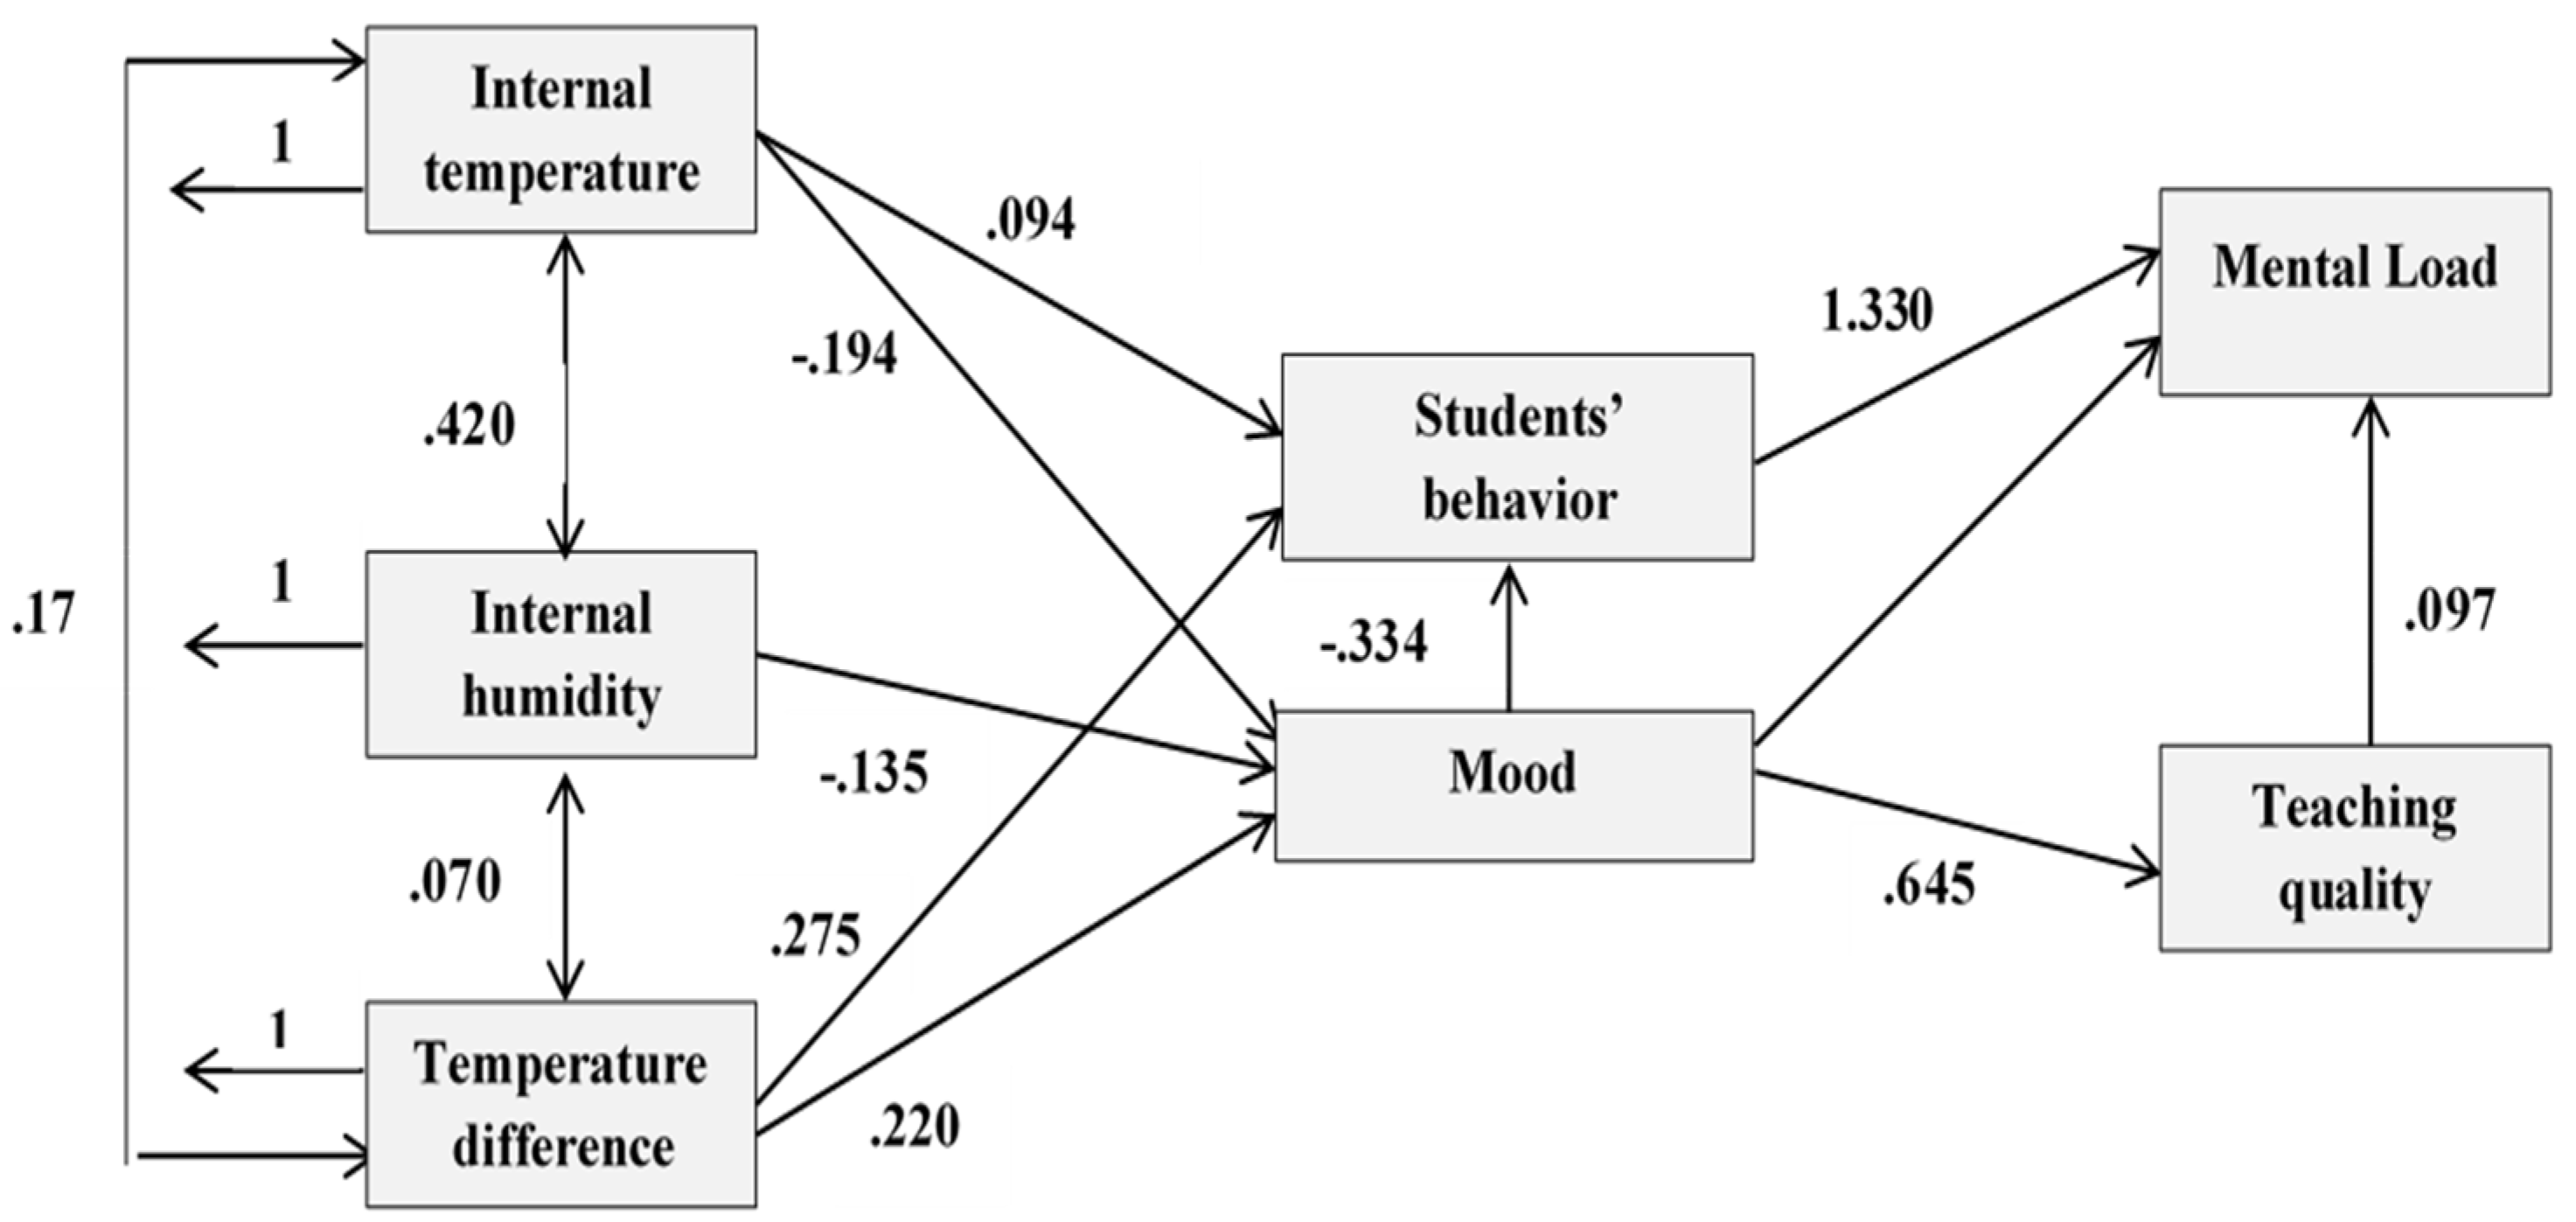 Sustainability | Free Full-Text | Influence of Air Temperature on School  Teachers' Mood and the Perception of Students' Behavior | HTML